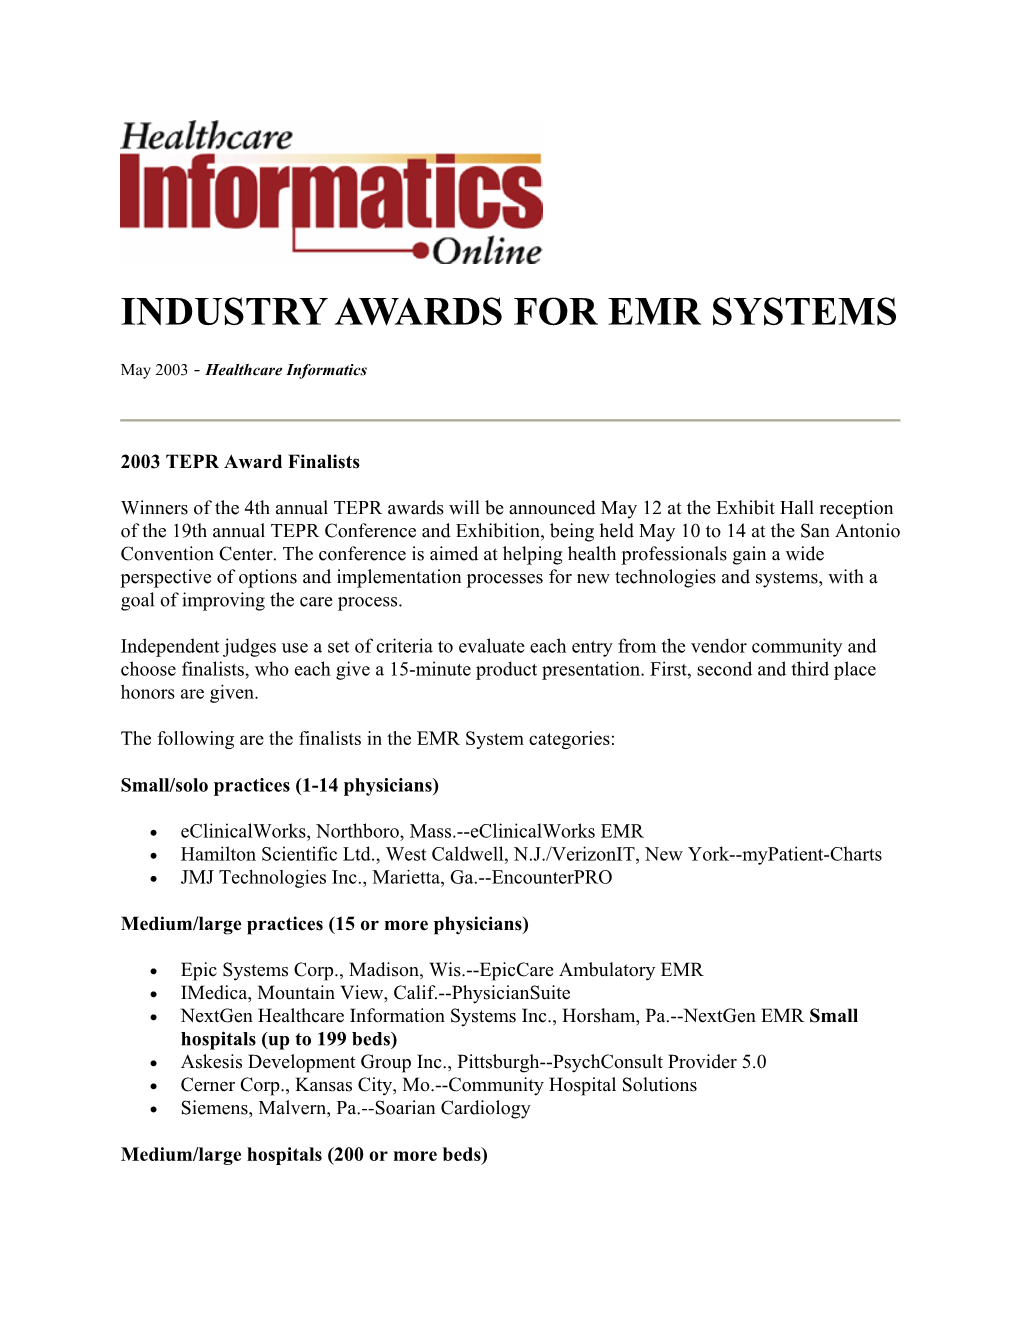 Industry Awards for Emr Systems